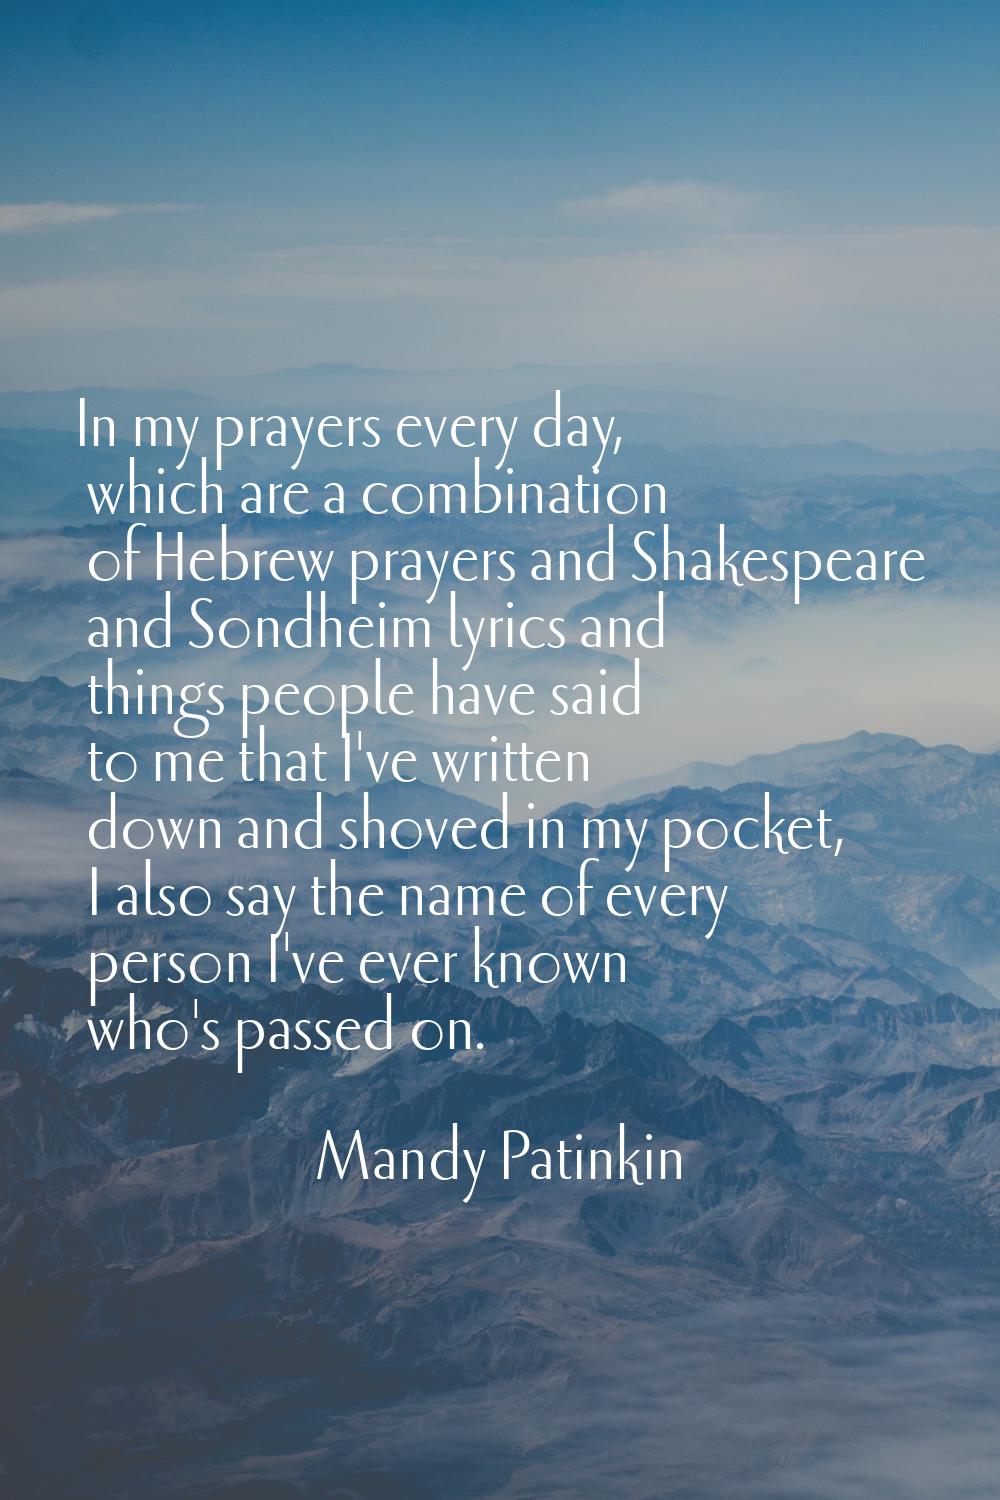 In my prayers every day, which are a combination of Hebrew prayers and Shakespeare and Sondheim lyr